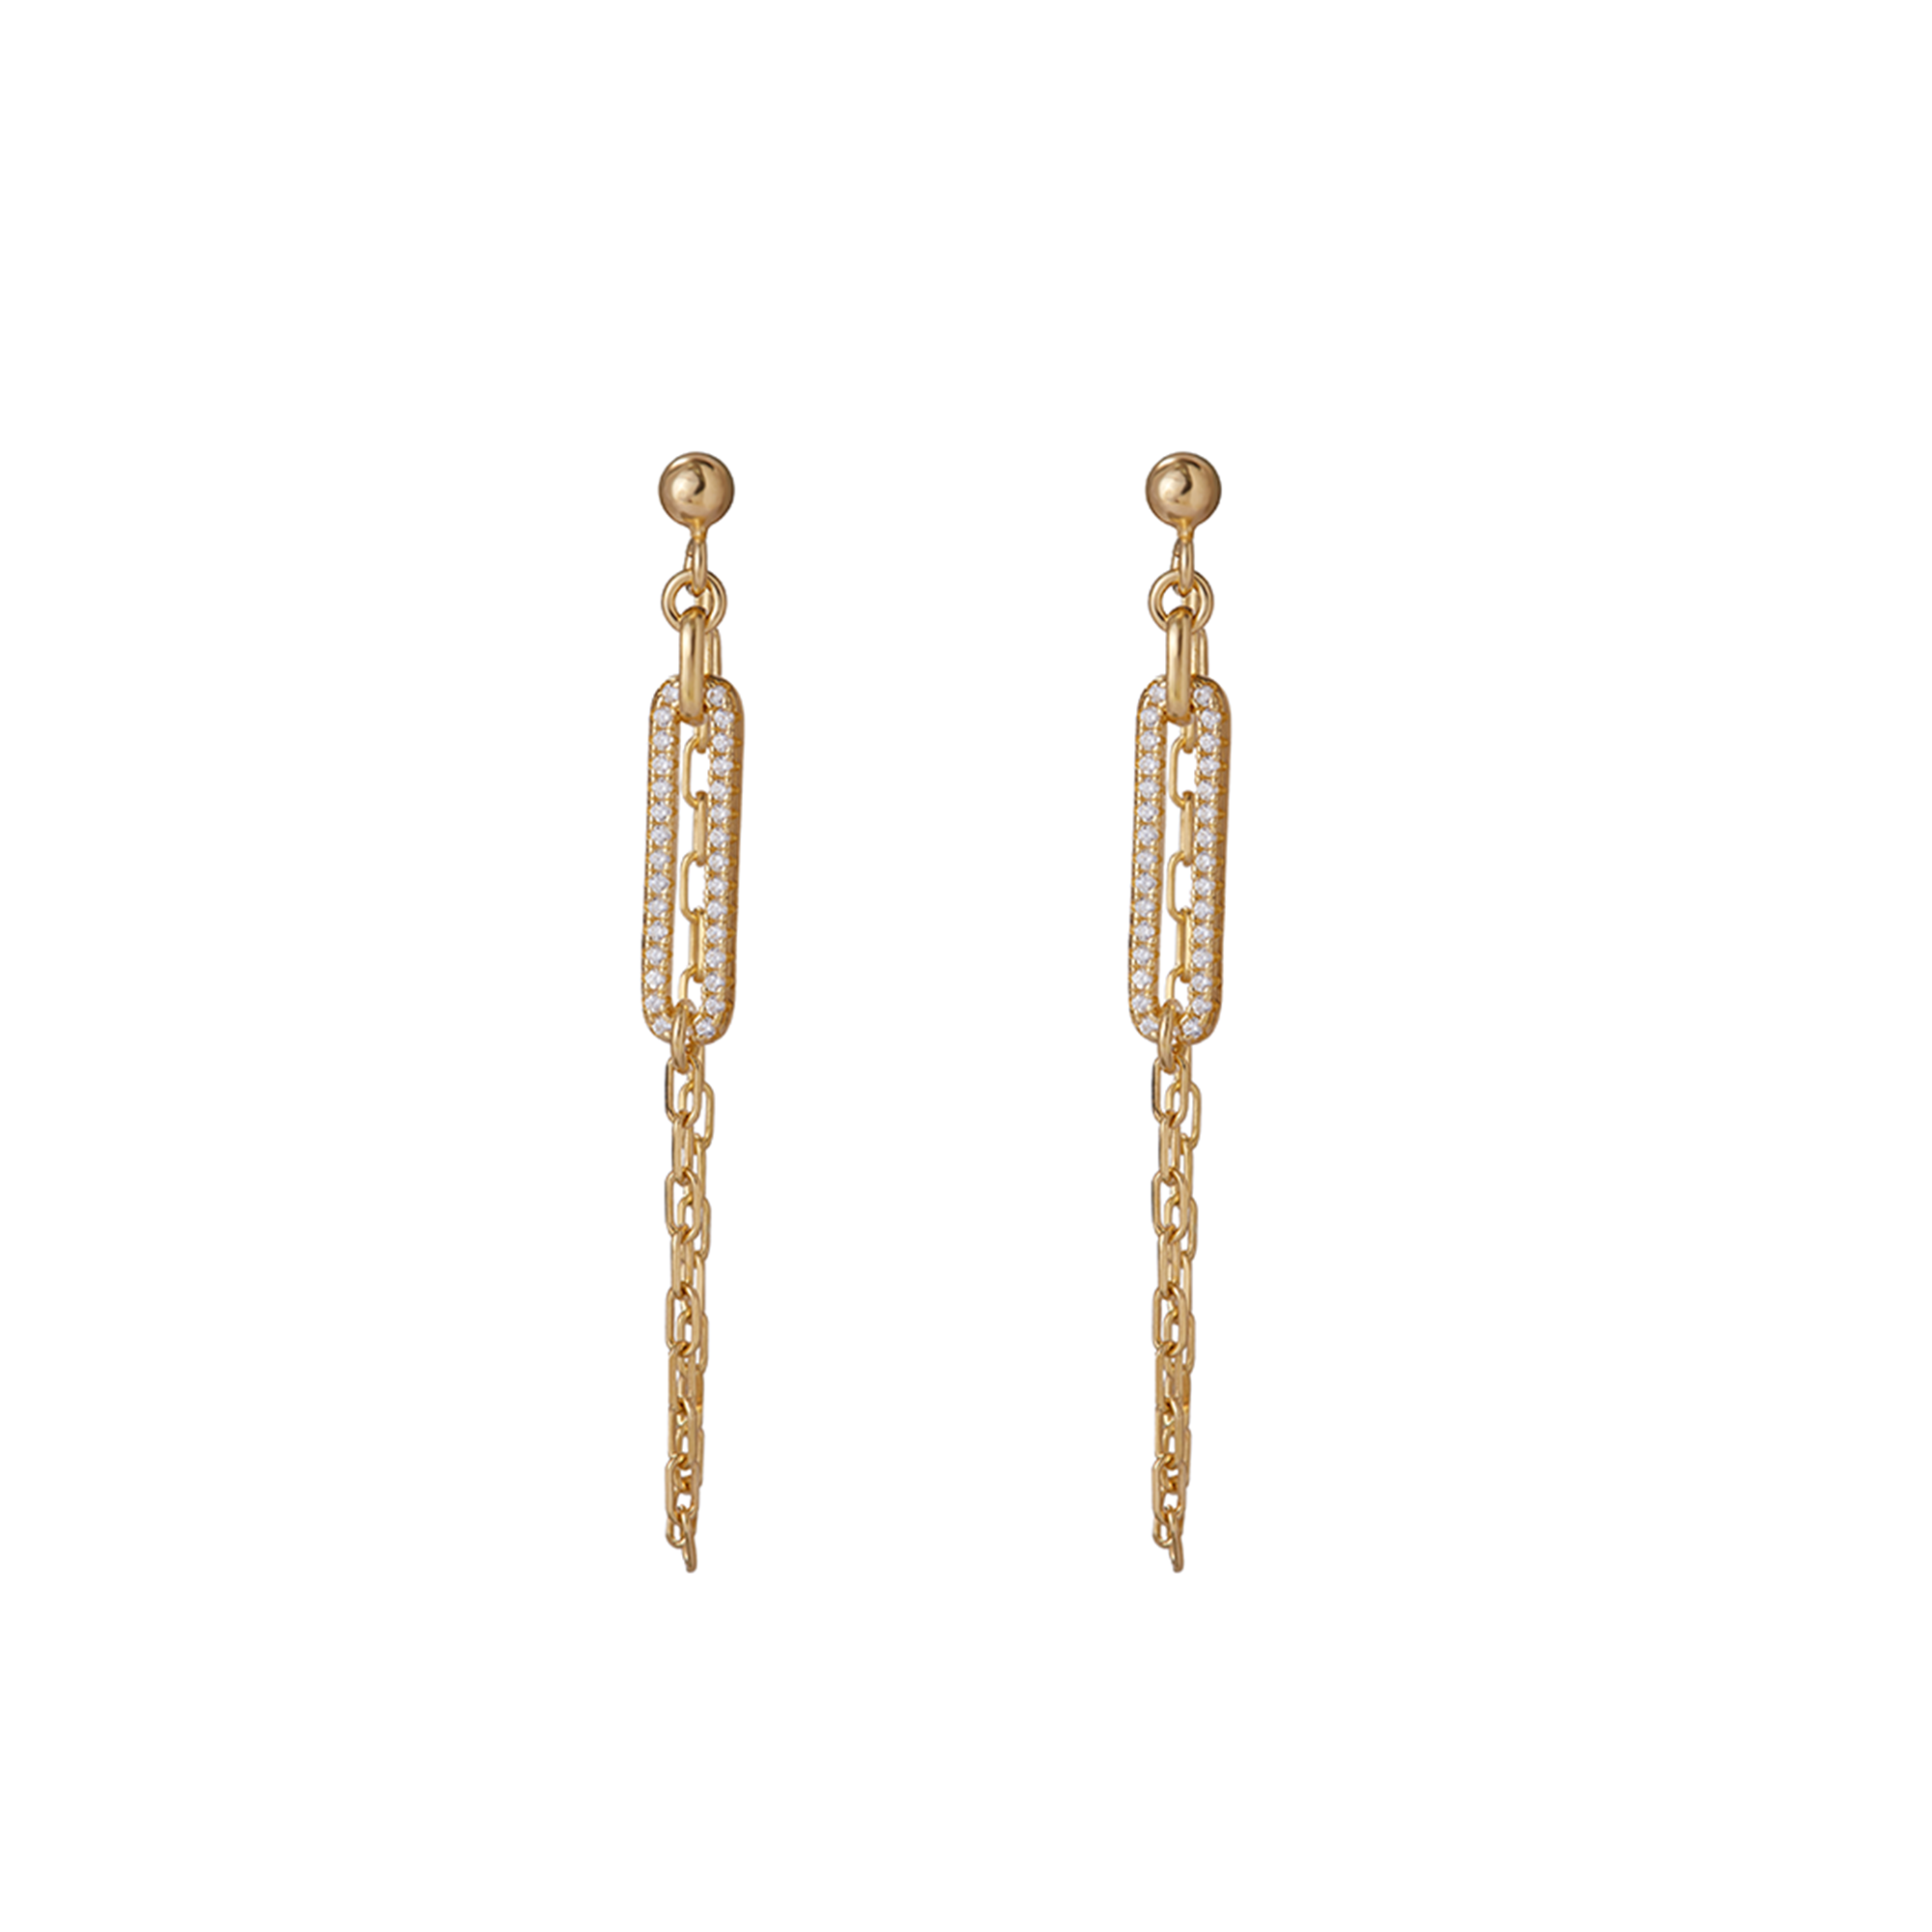 THE CZ PAVE CHAIN DROP EARRING